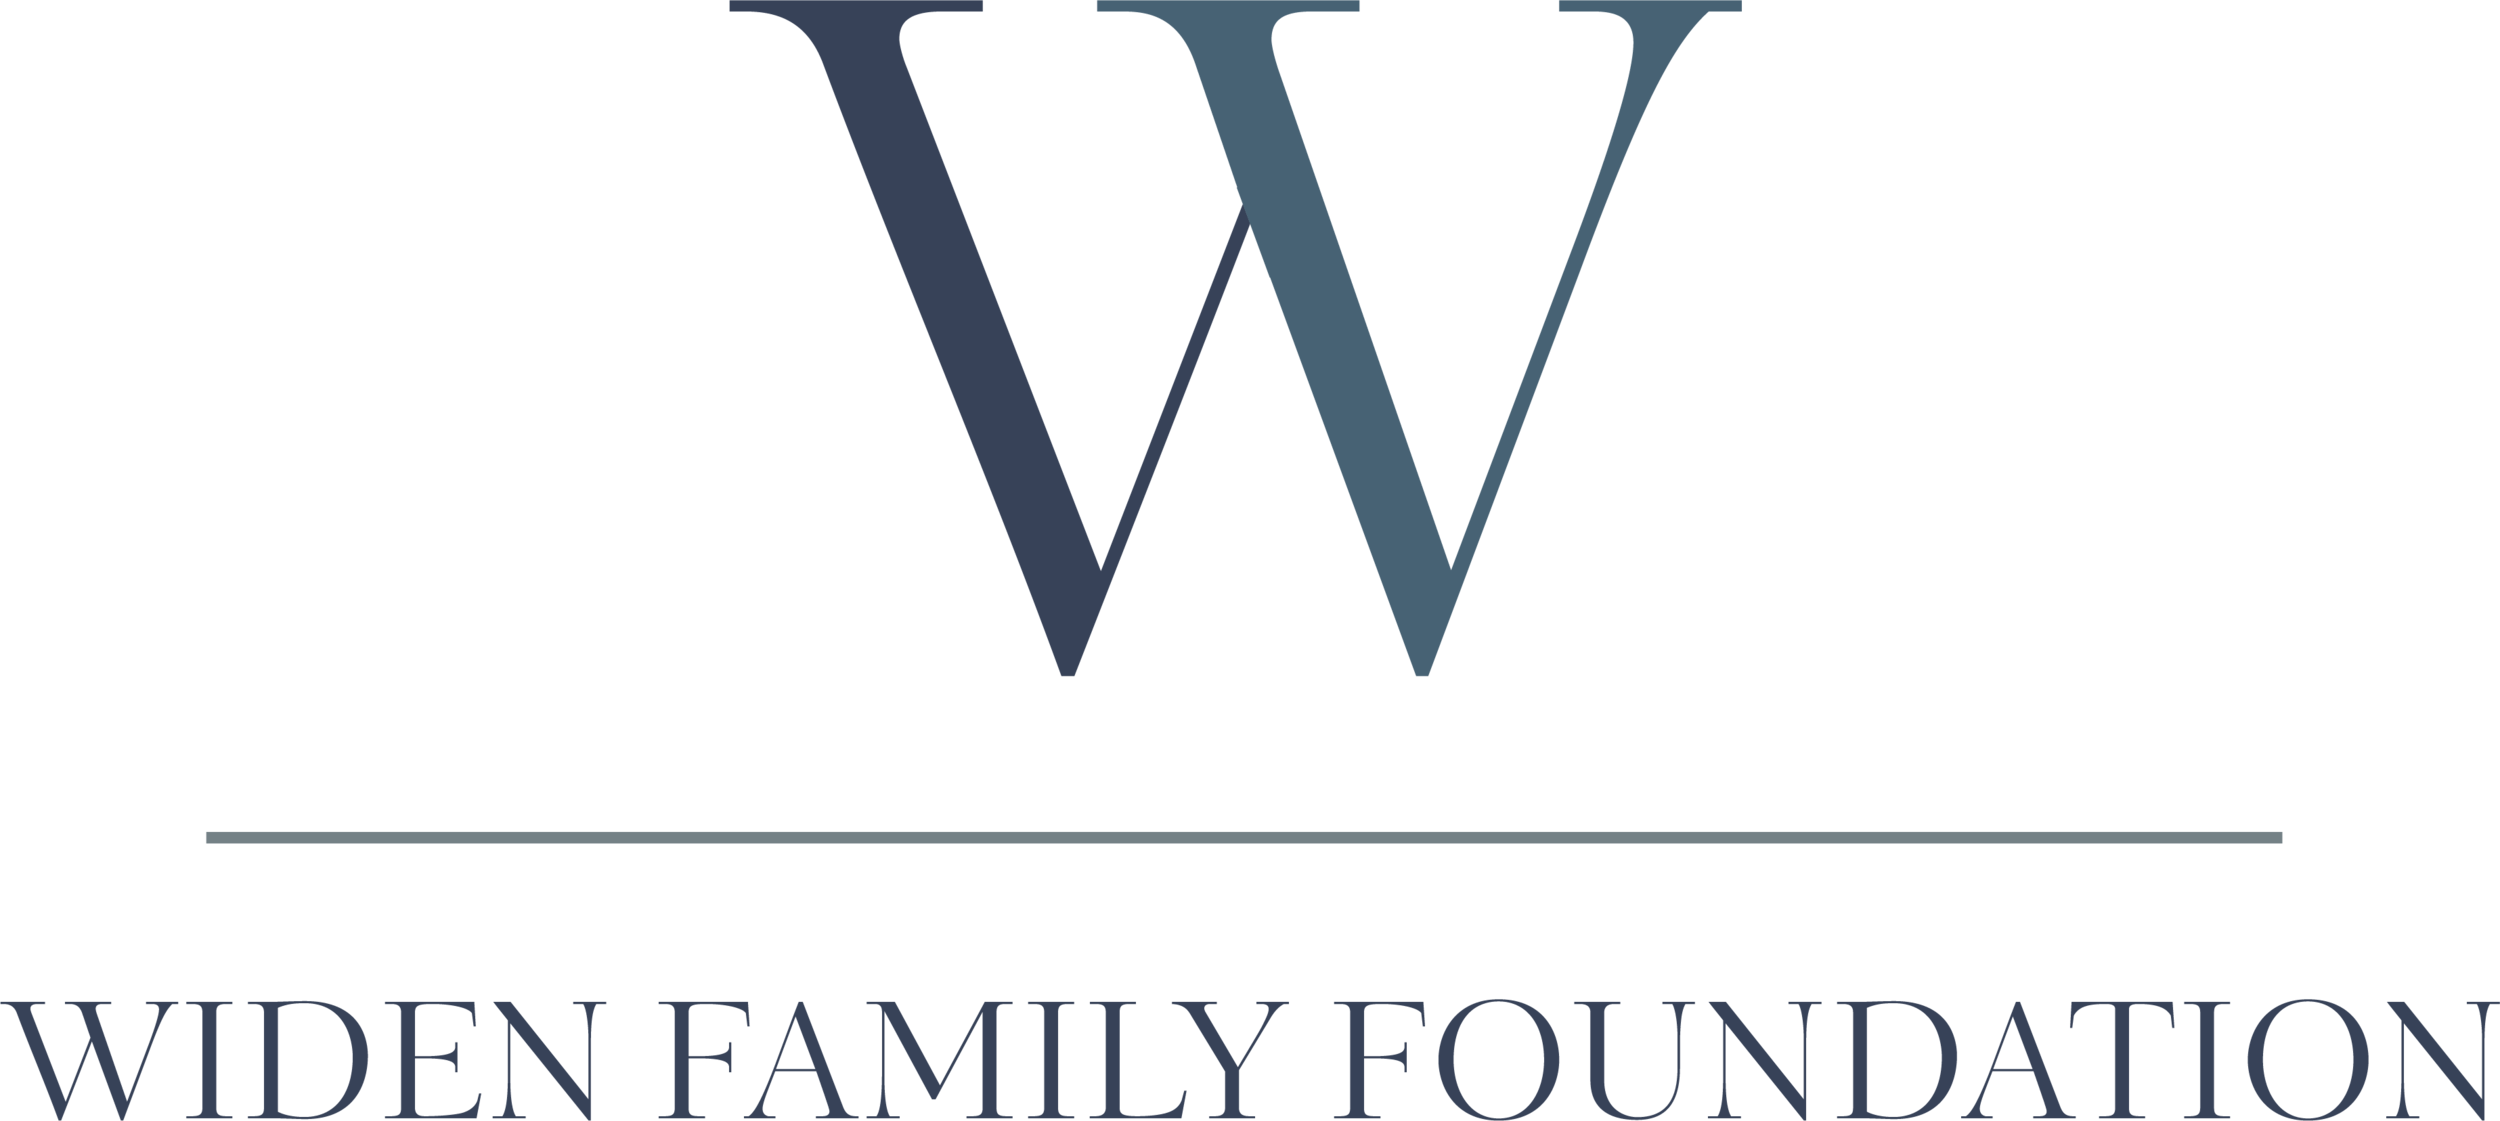 Widen Family Foundation